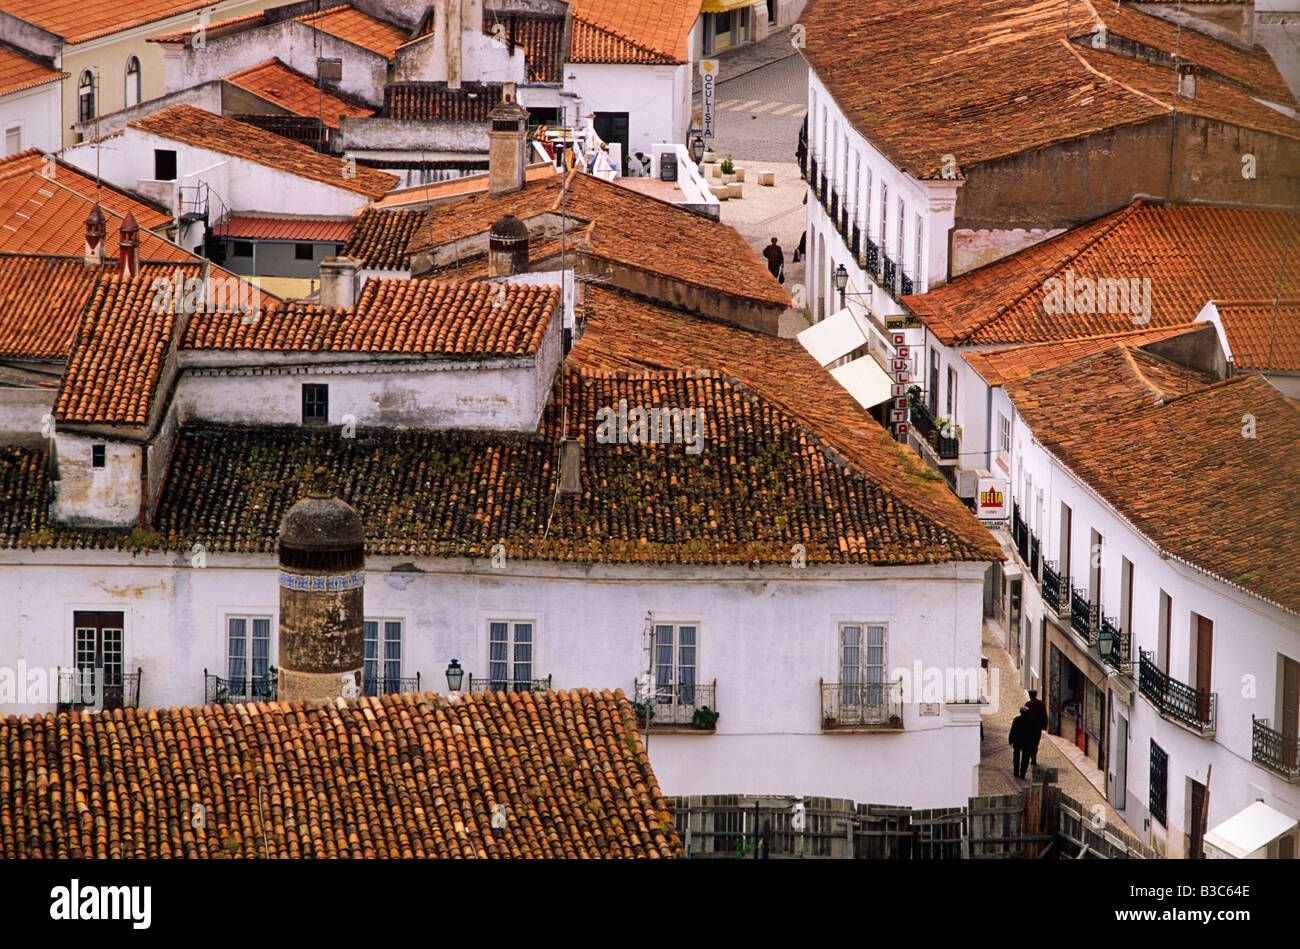 Portugal, Alentejo, Moura. View across the rooftops. The Arab influence is still visible at this peaceful town, surrounded by oaks and olive trees, particularly in the narrow streets and low whitewashed houses, with their pepperpot chimneys, of the Moorish quarter. Stock Photo